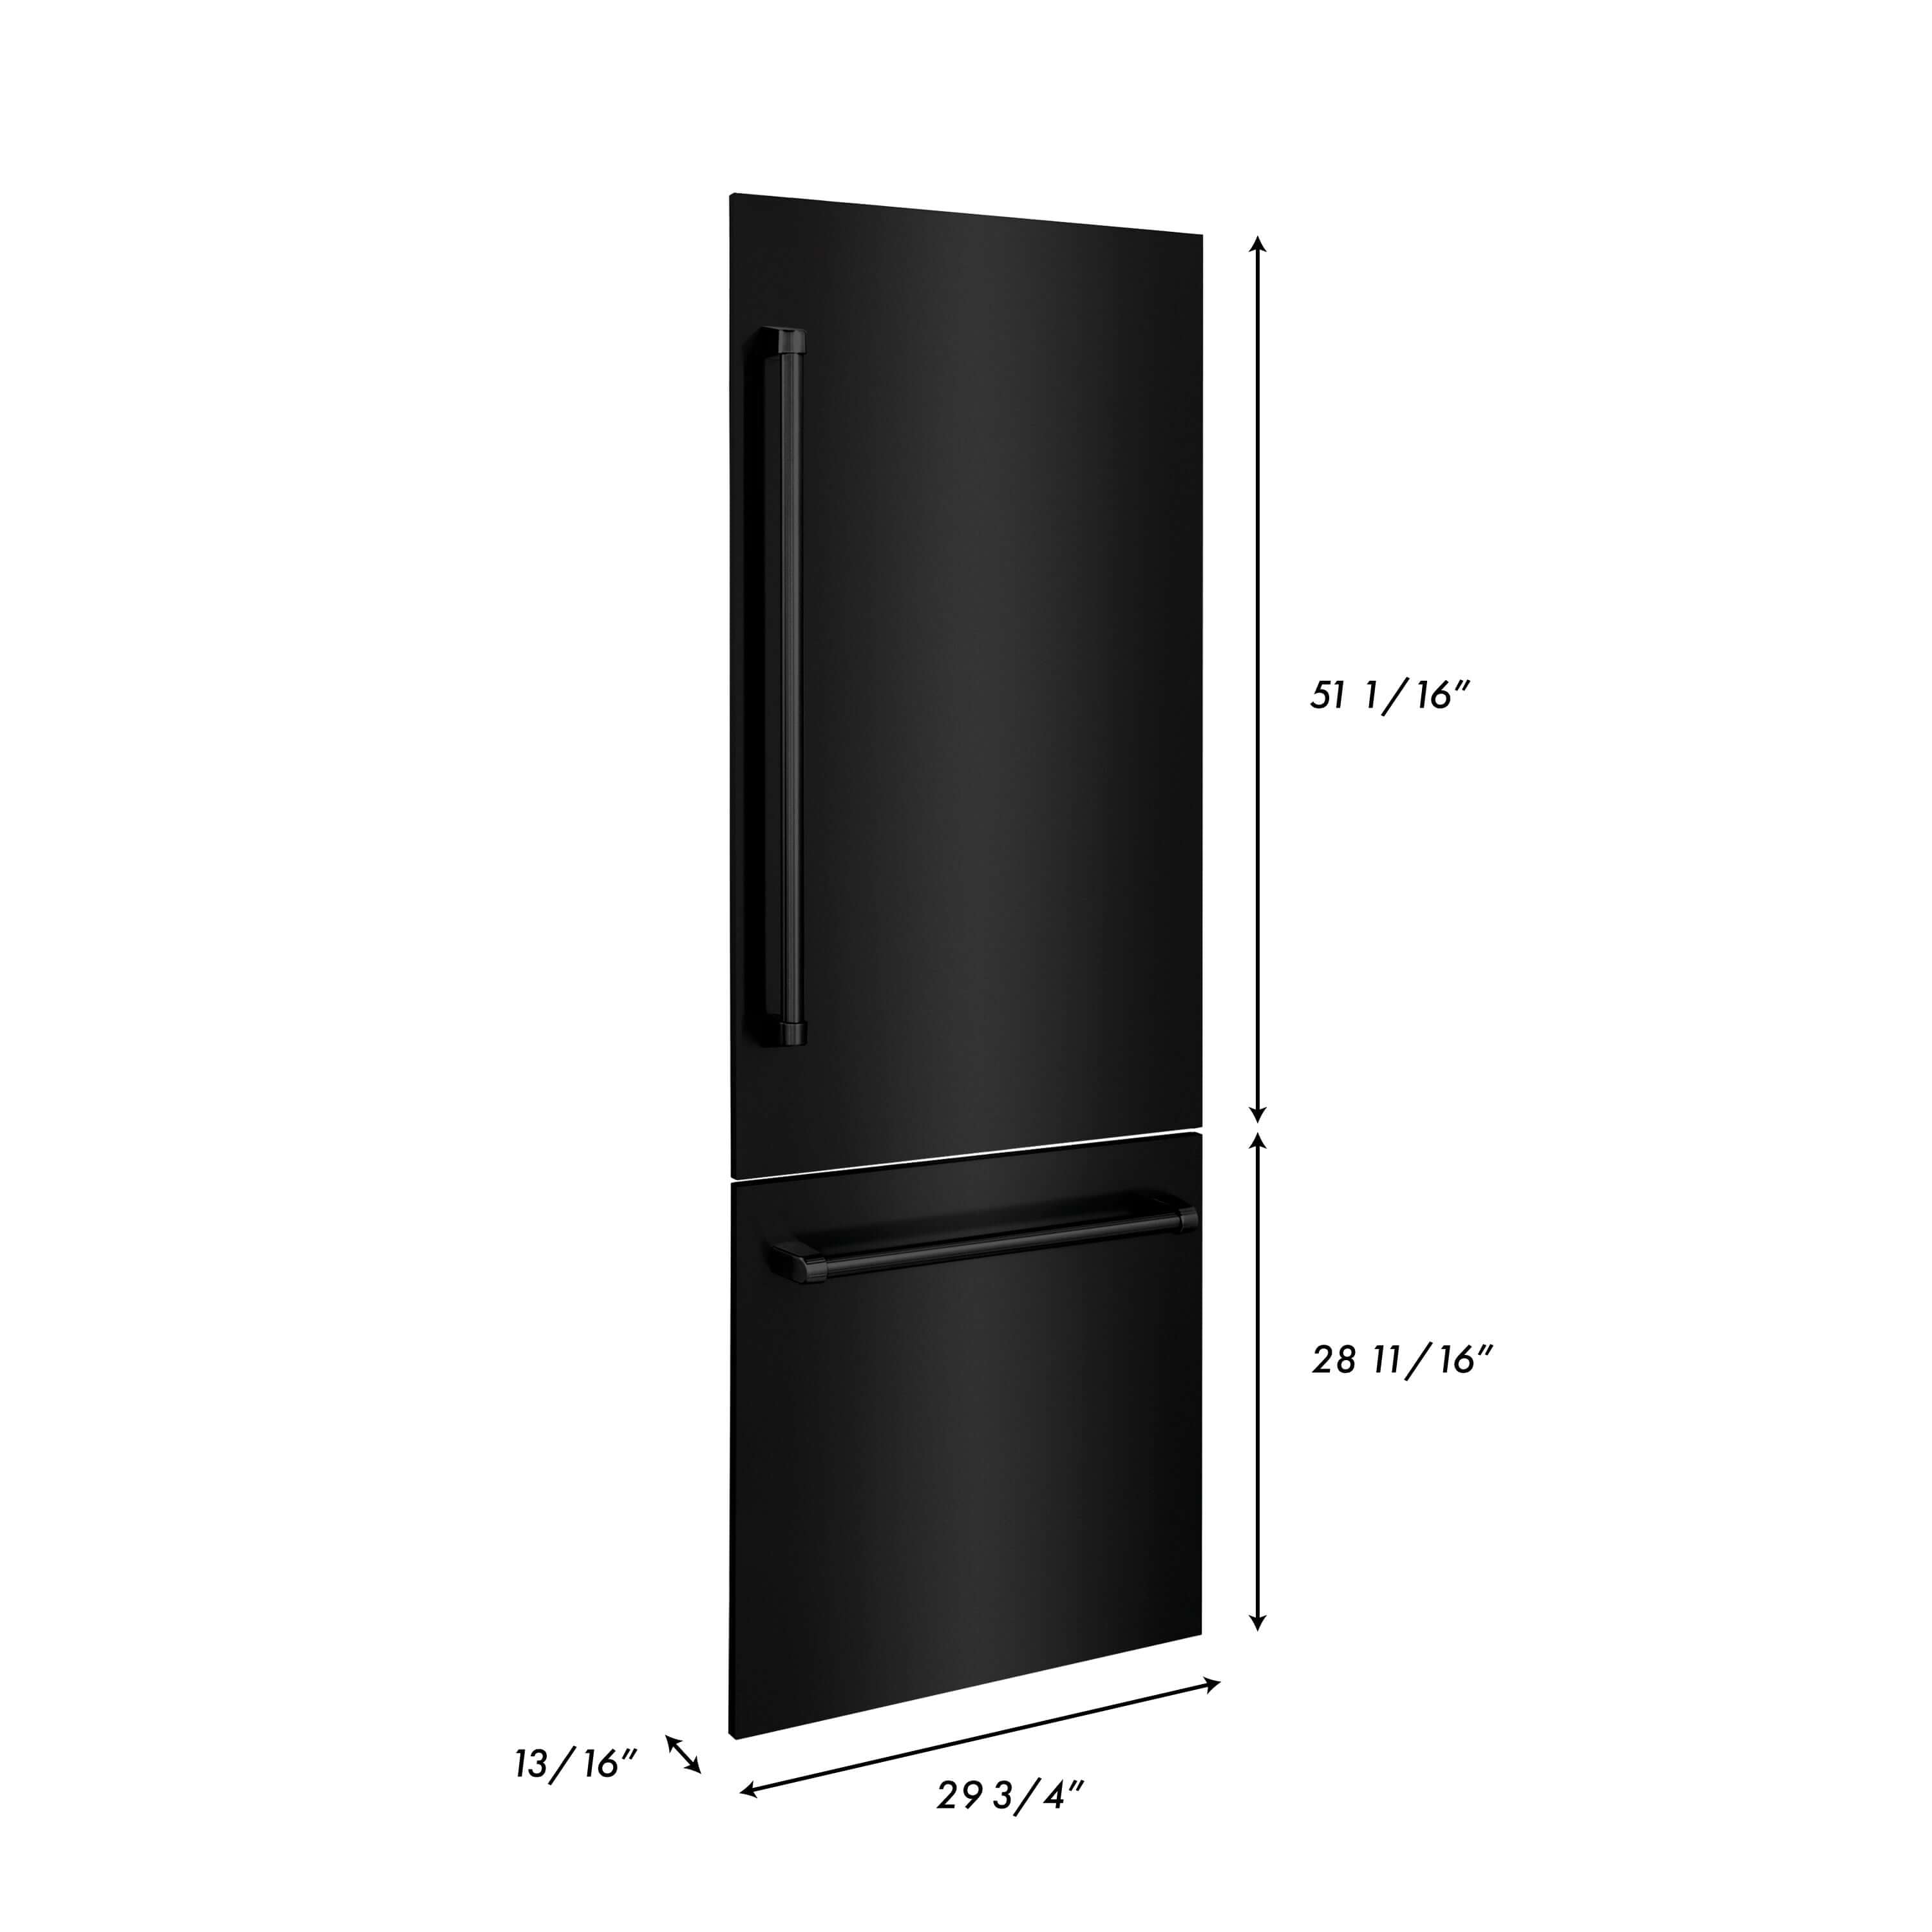 Panels & Handles Only- ZLINE 30 in. Refrigerator Panels in Black Stainless Steel for a 30 in. Built-in Refrigerator (RPBIV-BS-30) dimensional diagram with measurements.